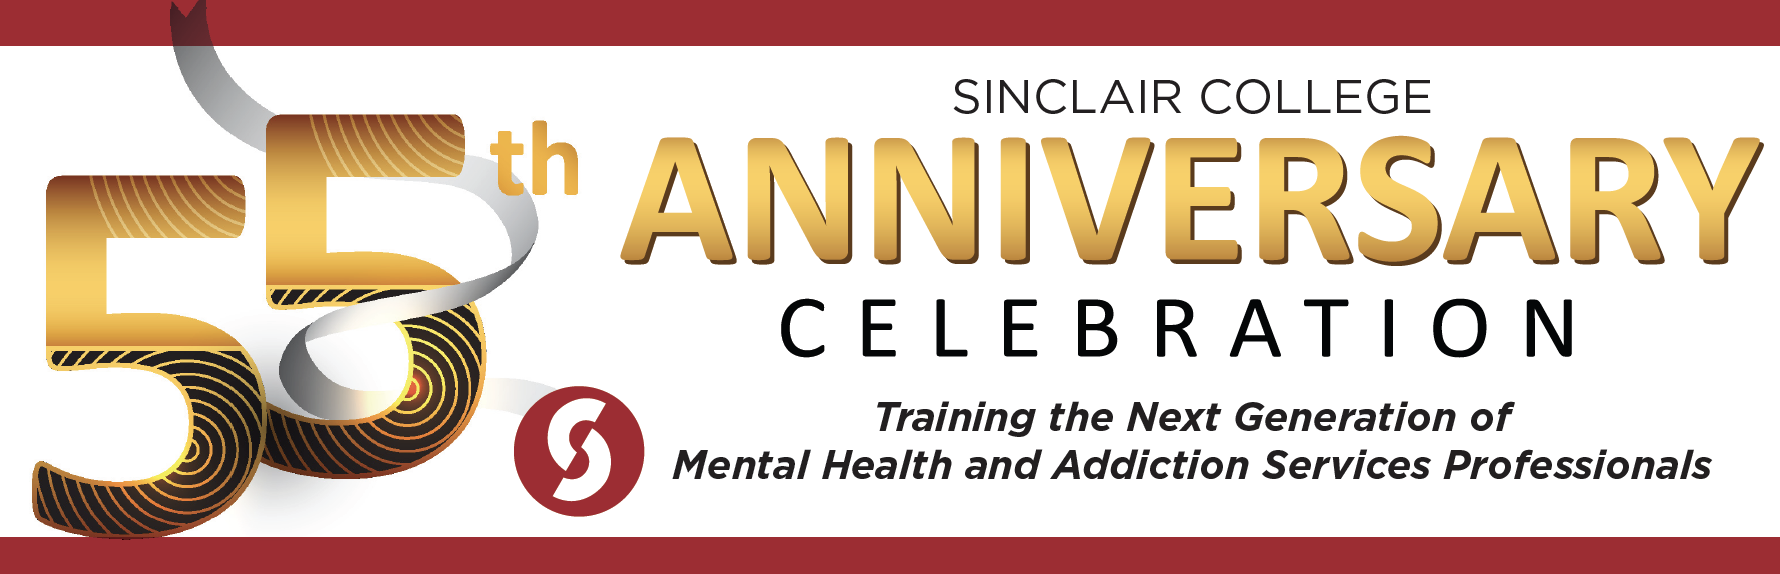 Celebrating 55 Years of Mental Health and Addiction Services